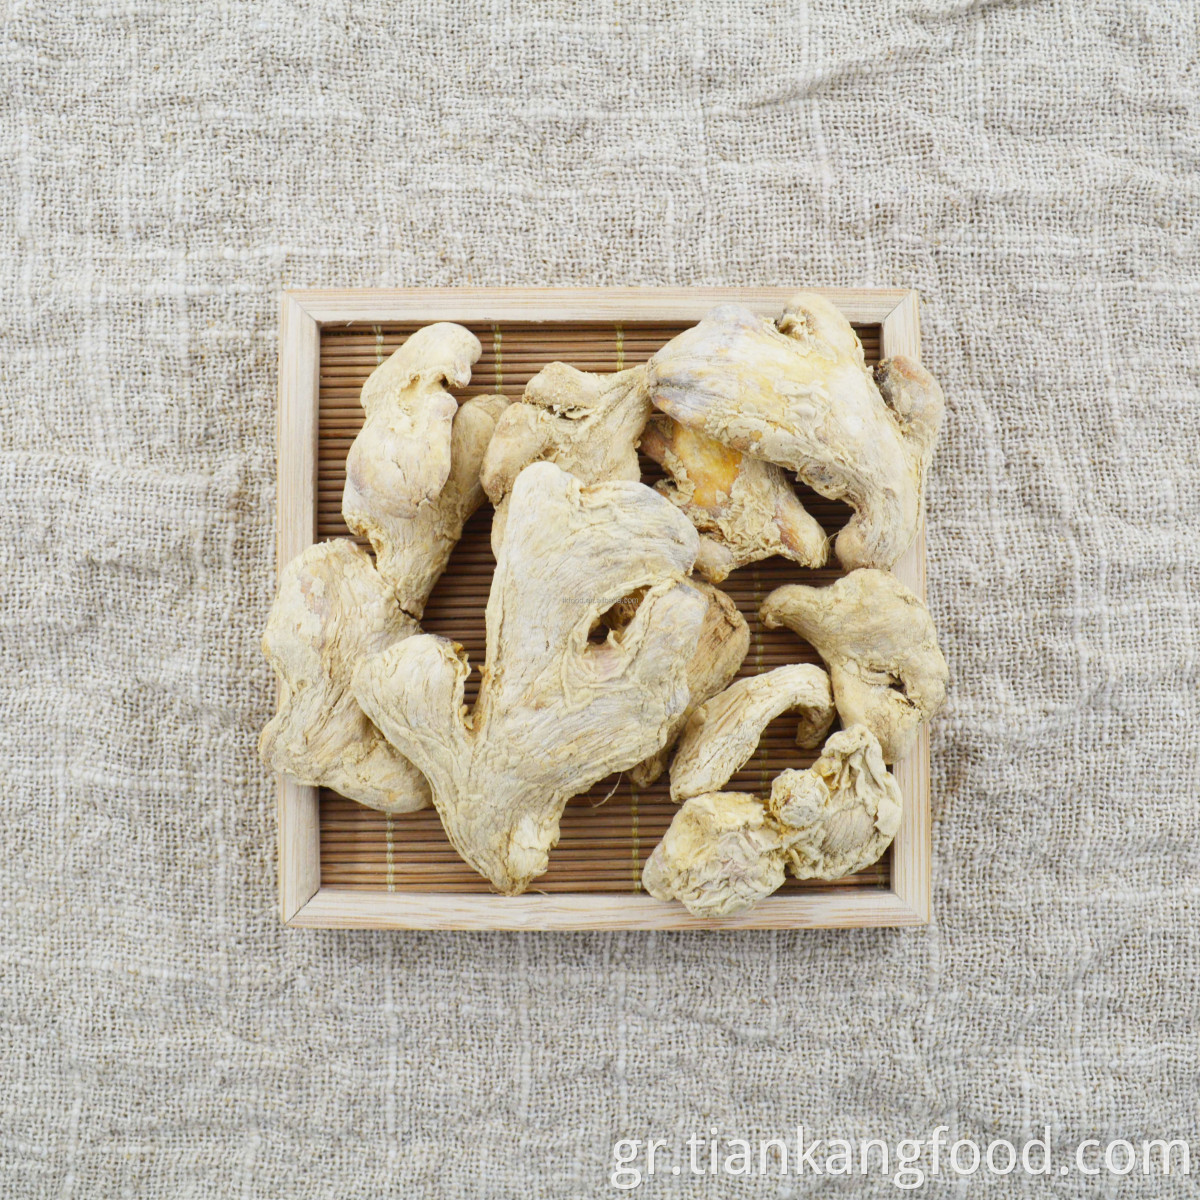 dried whole ginger